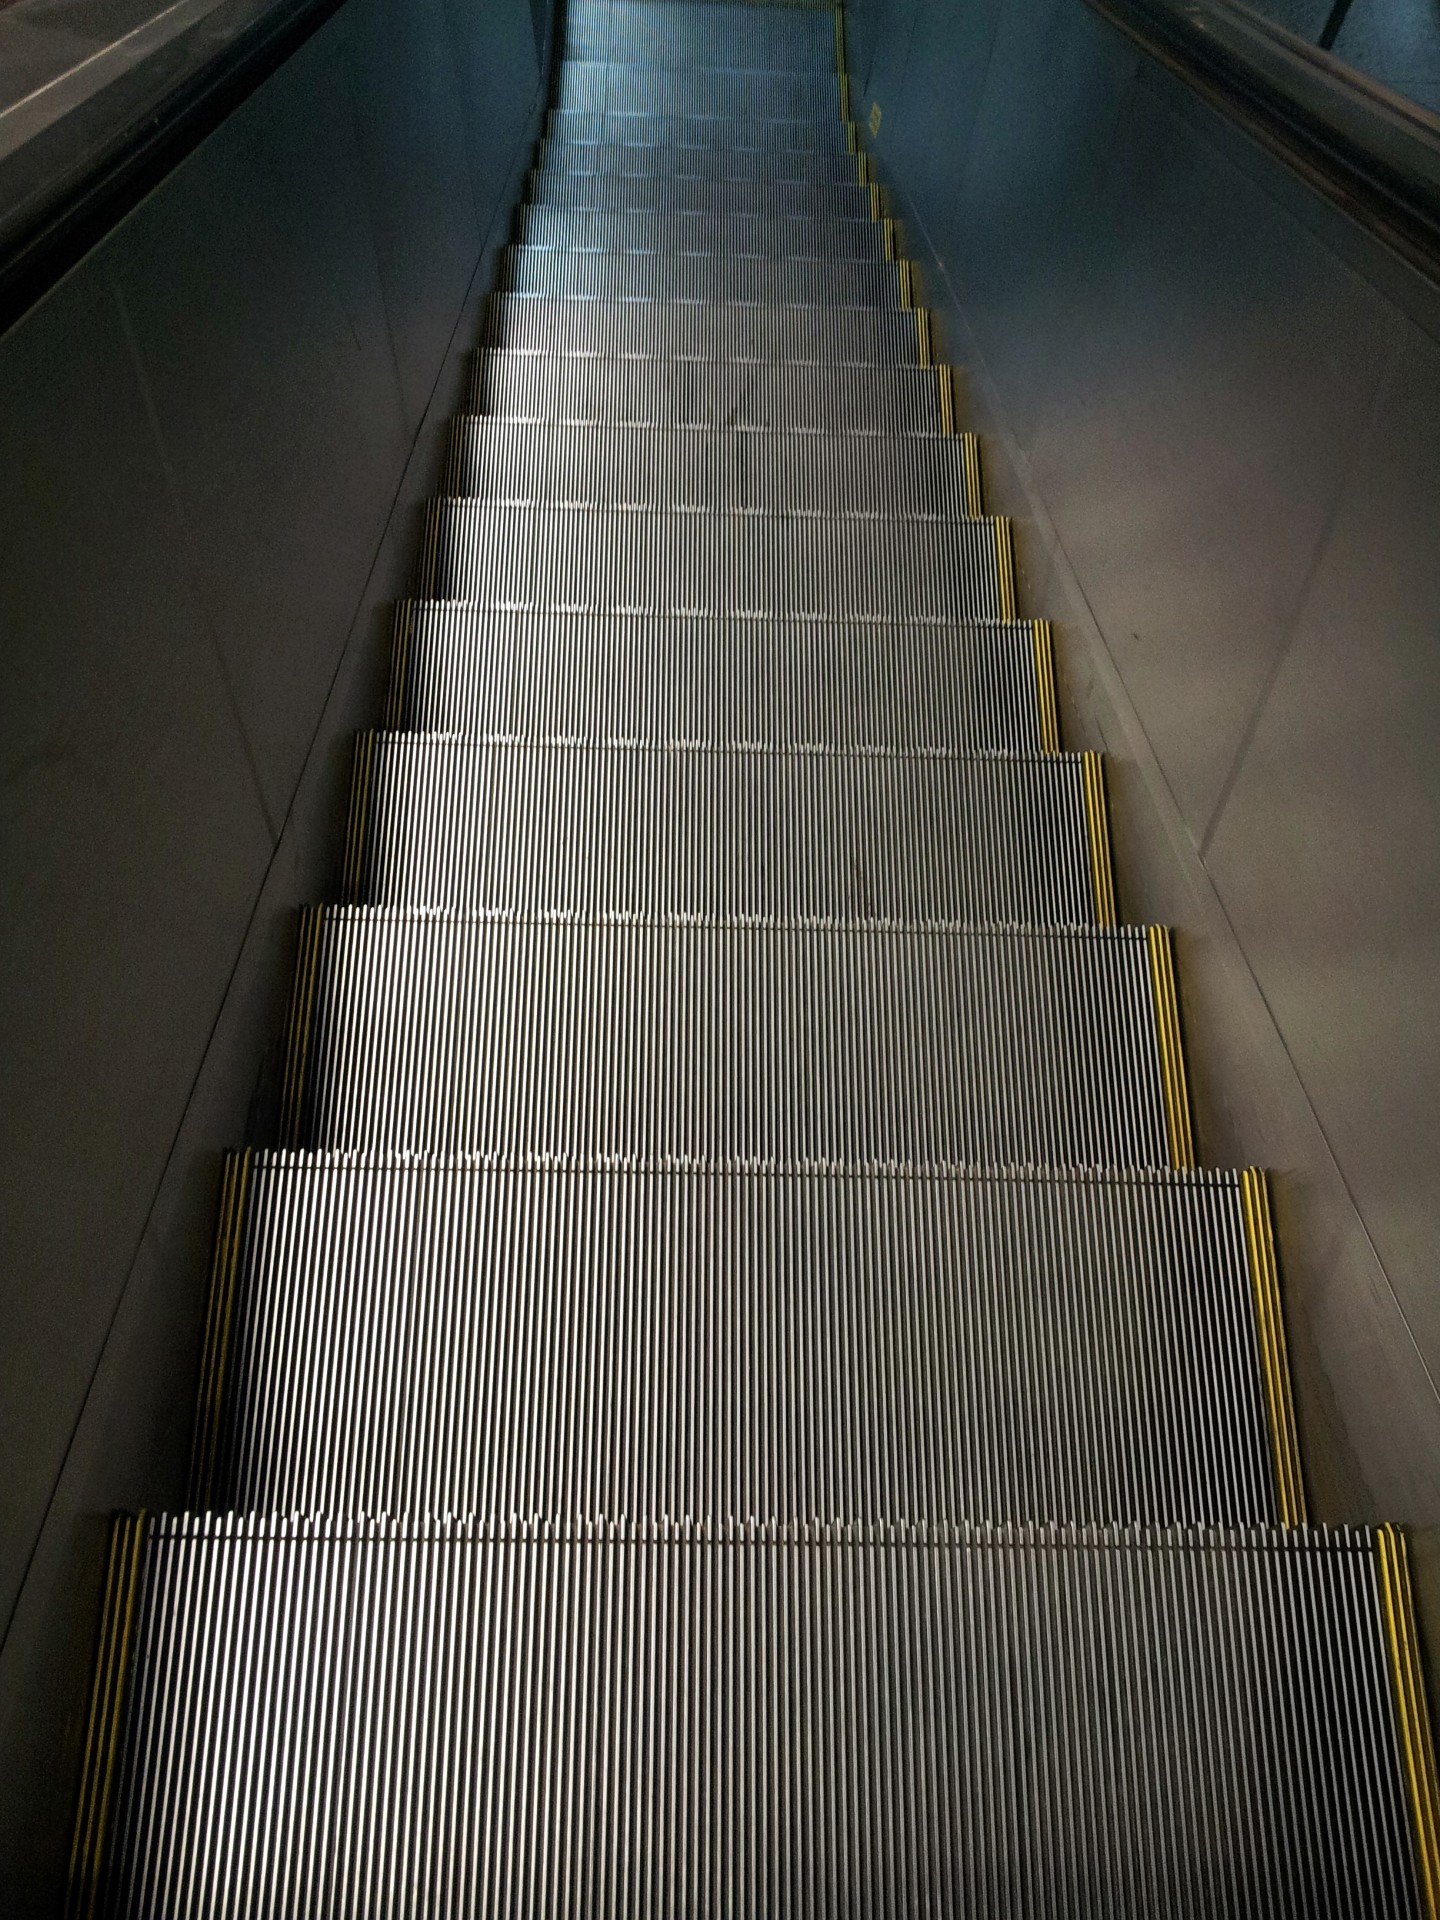 automatic escalator stair cases lift slope free photo